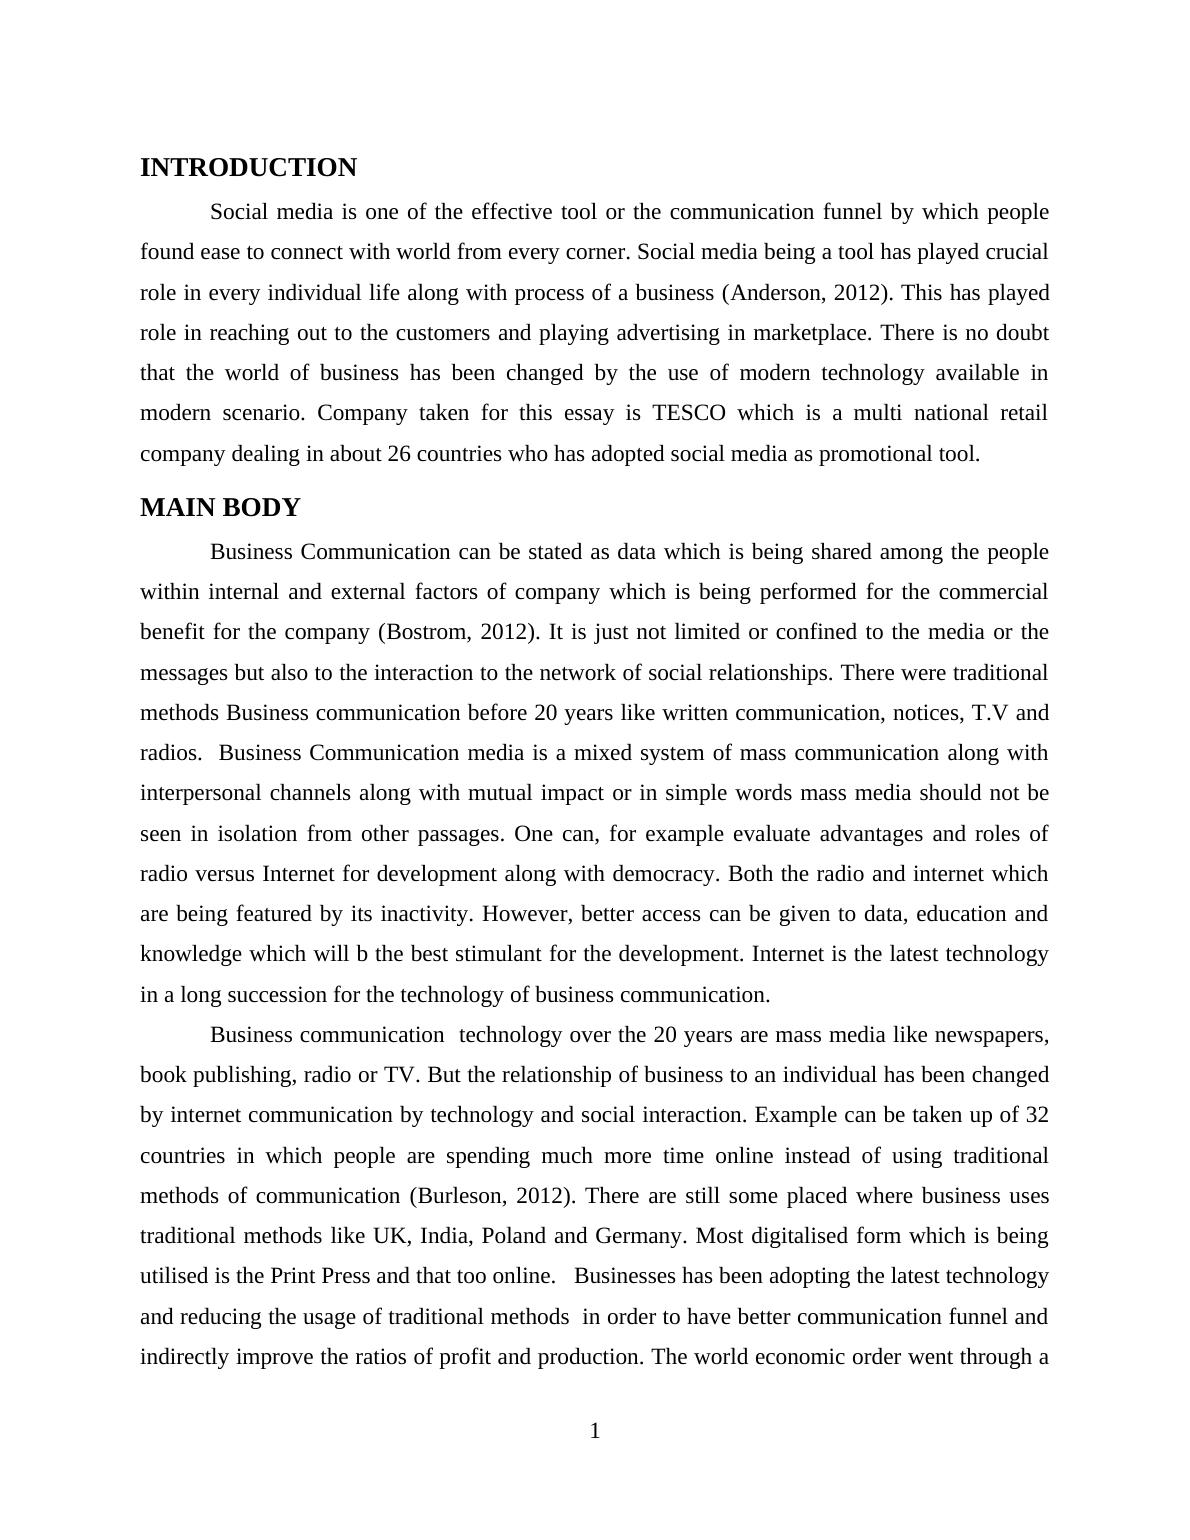 Essay on Interpersonal and E-Communication - Tesco_3